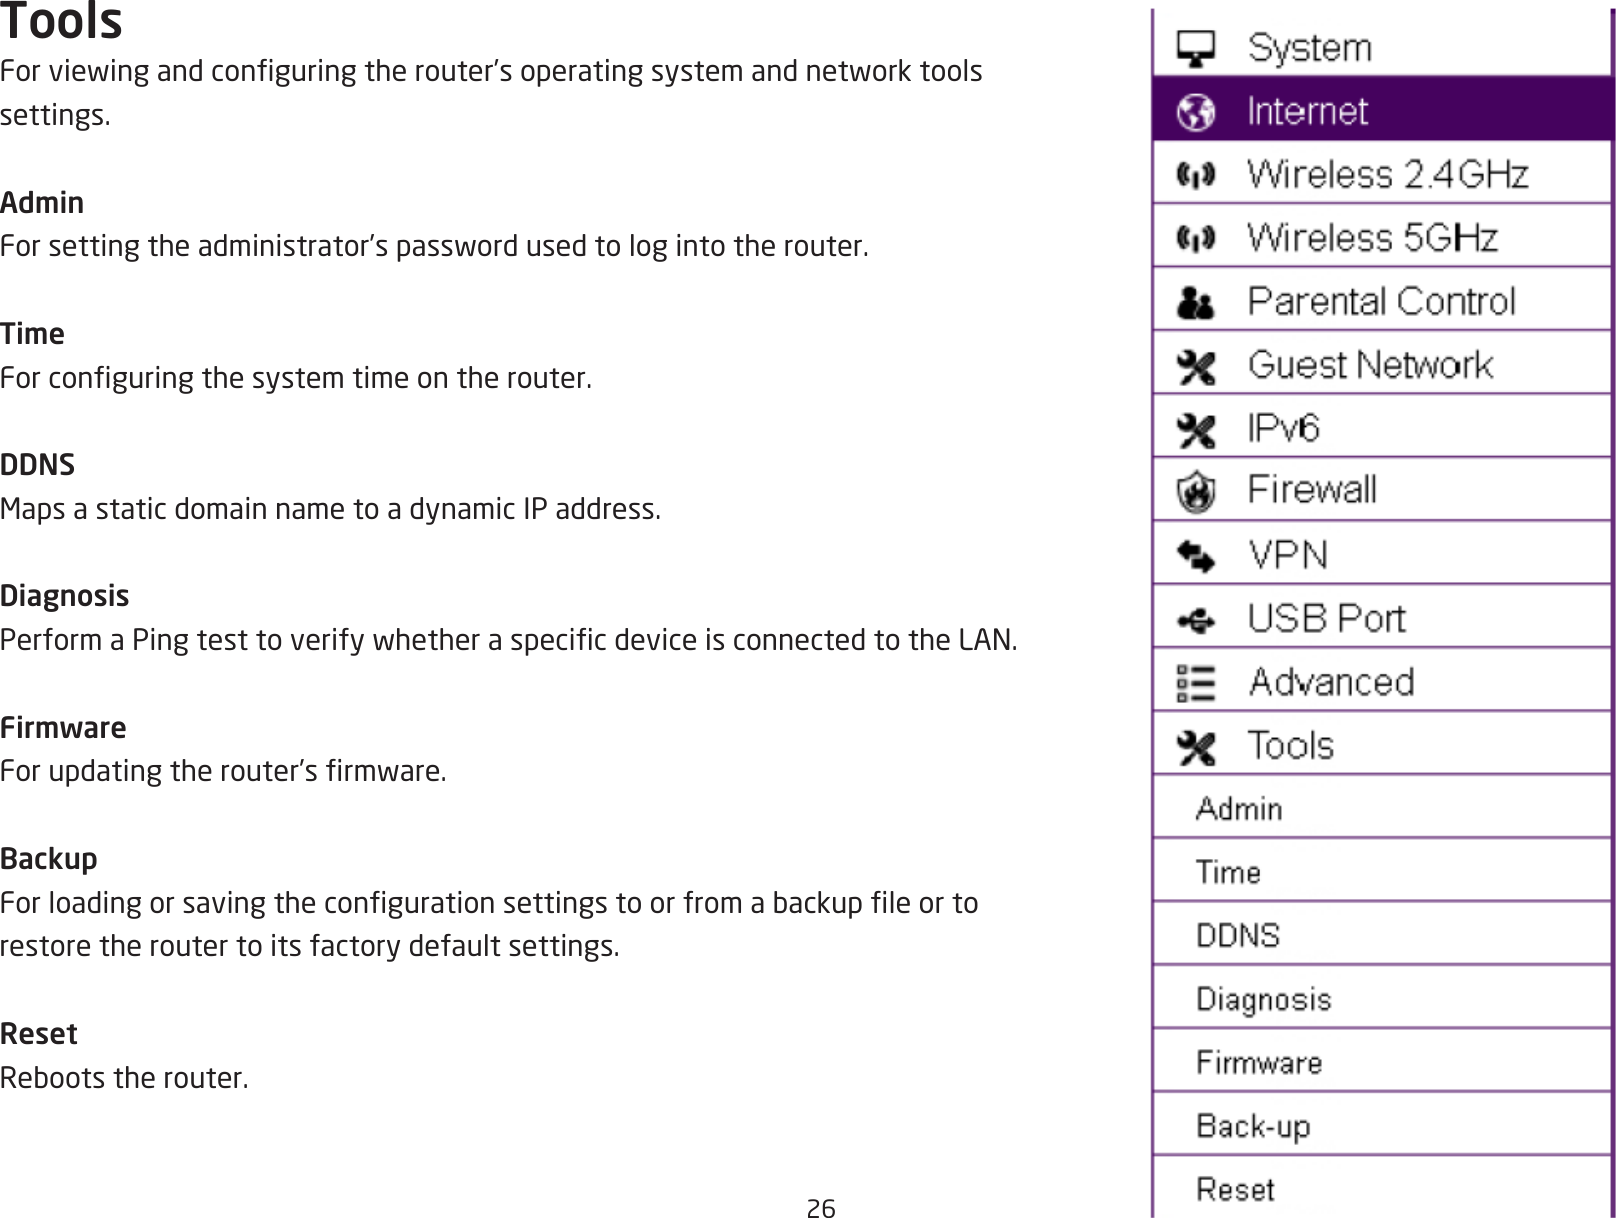 26ToolsForviewingandconguringtherouter’soperatingsystemandnetworktoolssettings.AdminForsettingtheadministrator’spasswordusedtologintotherouter.TimeForconguringthesystemtimeontherouter.DDNSMapsastaticdomainnametoadynamicIPaddress.DiagnosisPerformaPingtesttoverifywhetheraspecicdeviceisconnectedtotheLAN.FirmwareForupdatingtherouter’srmware.BackupForloadingorsavingthecongurationsettingstoorfromabackupleortorestore the router to its factory default settings.ResetRebootstherouter.